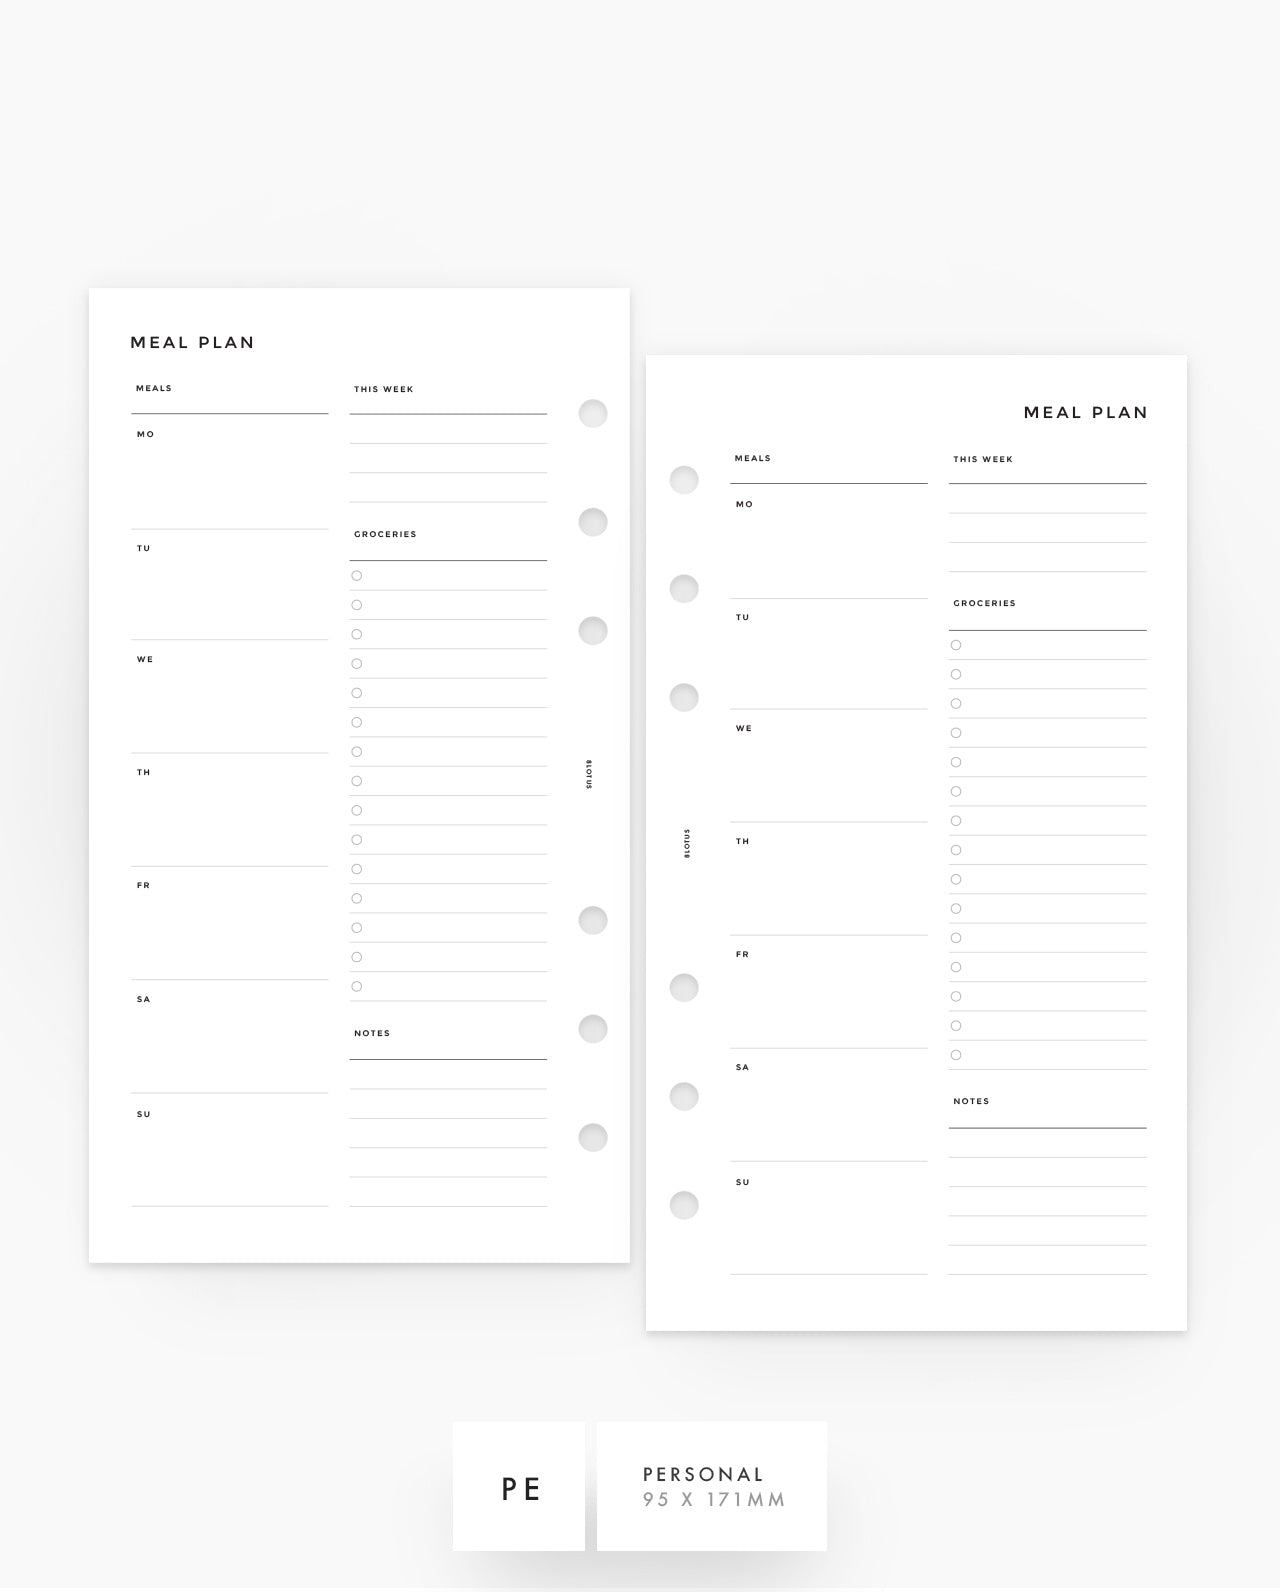 MN099 - Meal Planner - WO1P - PDF